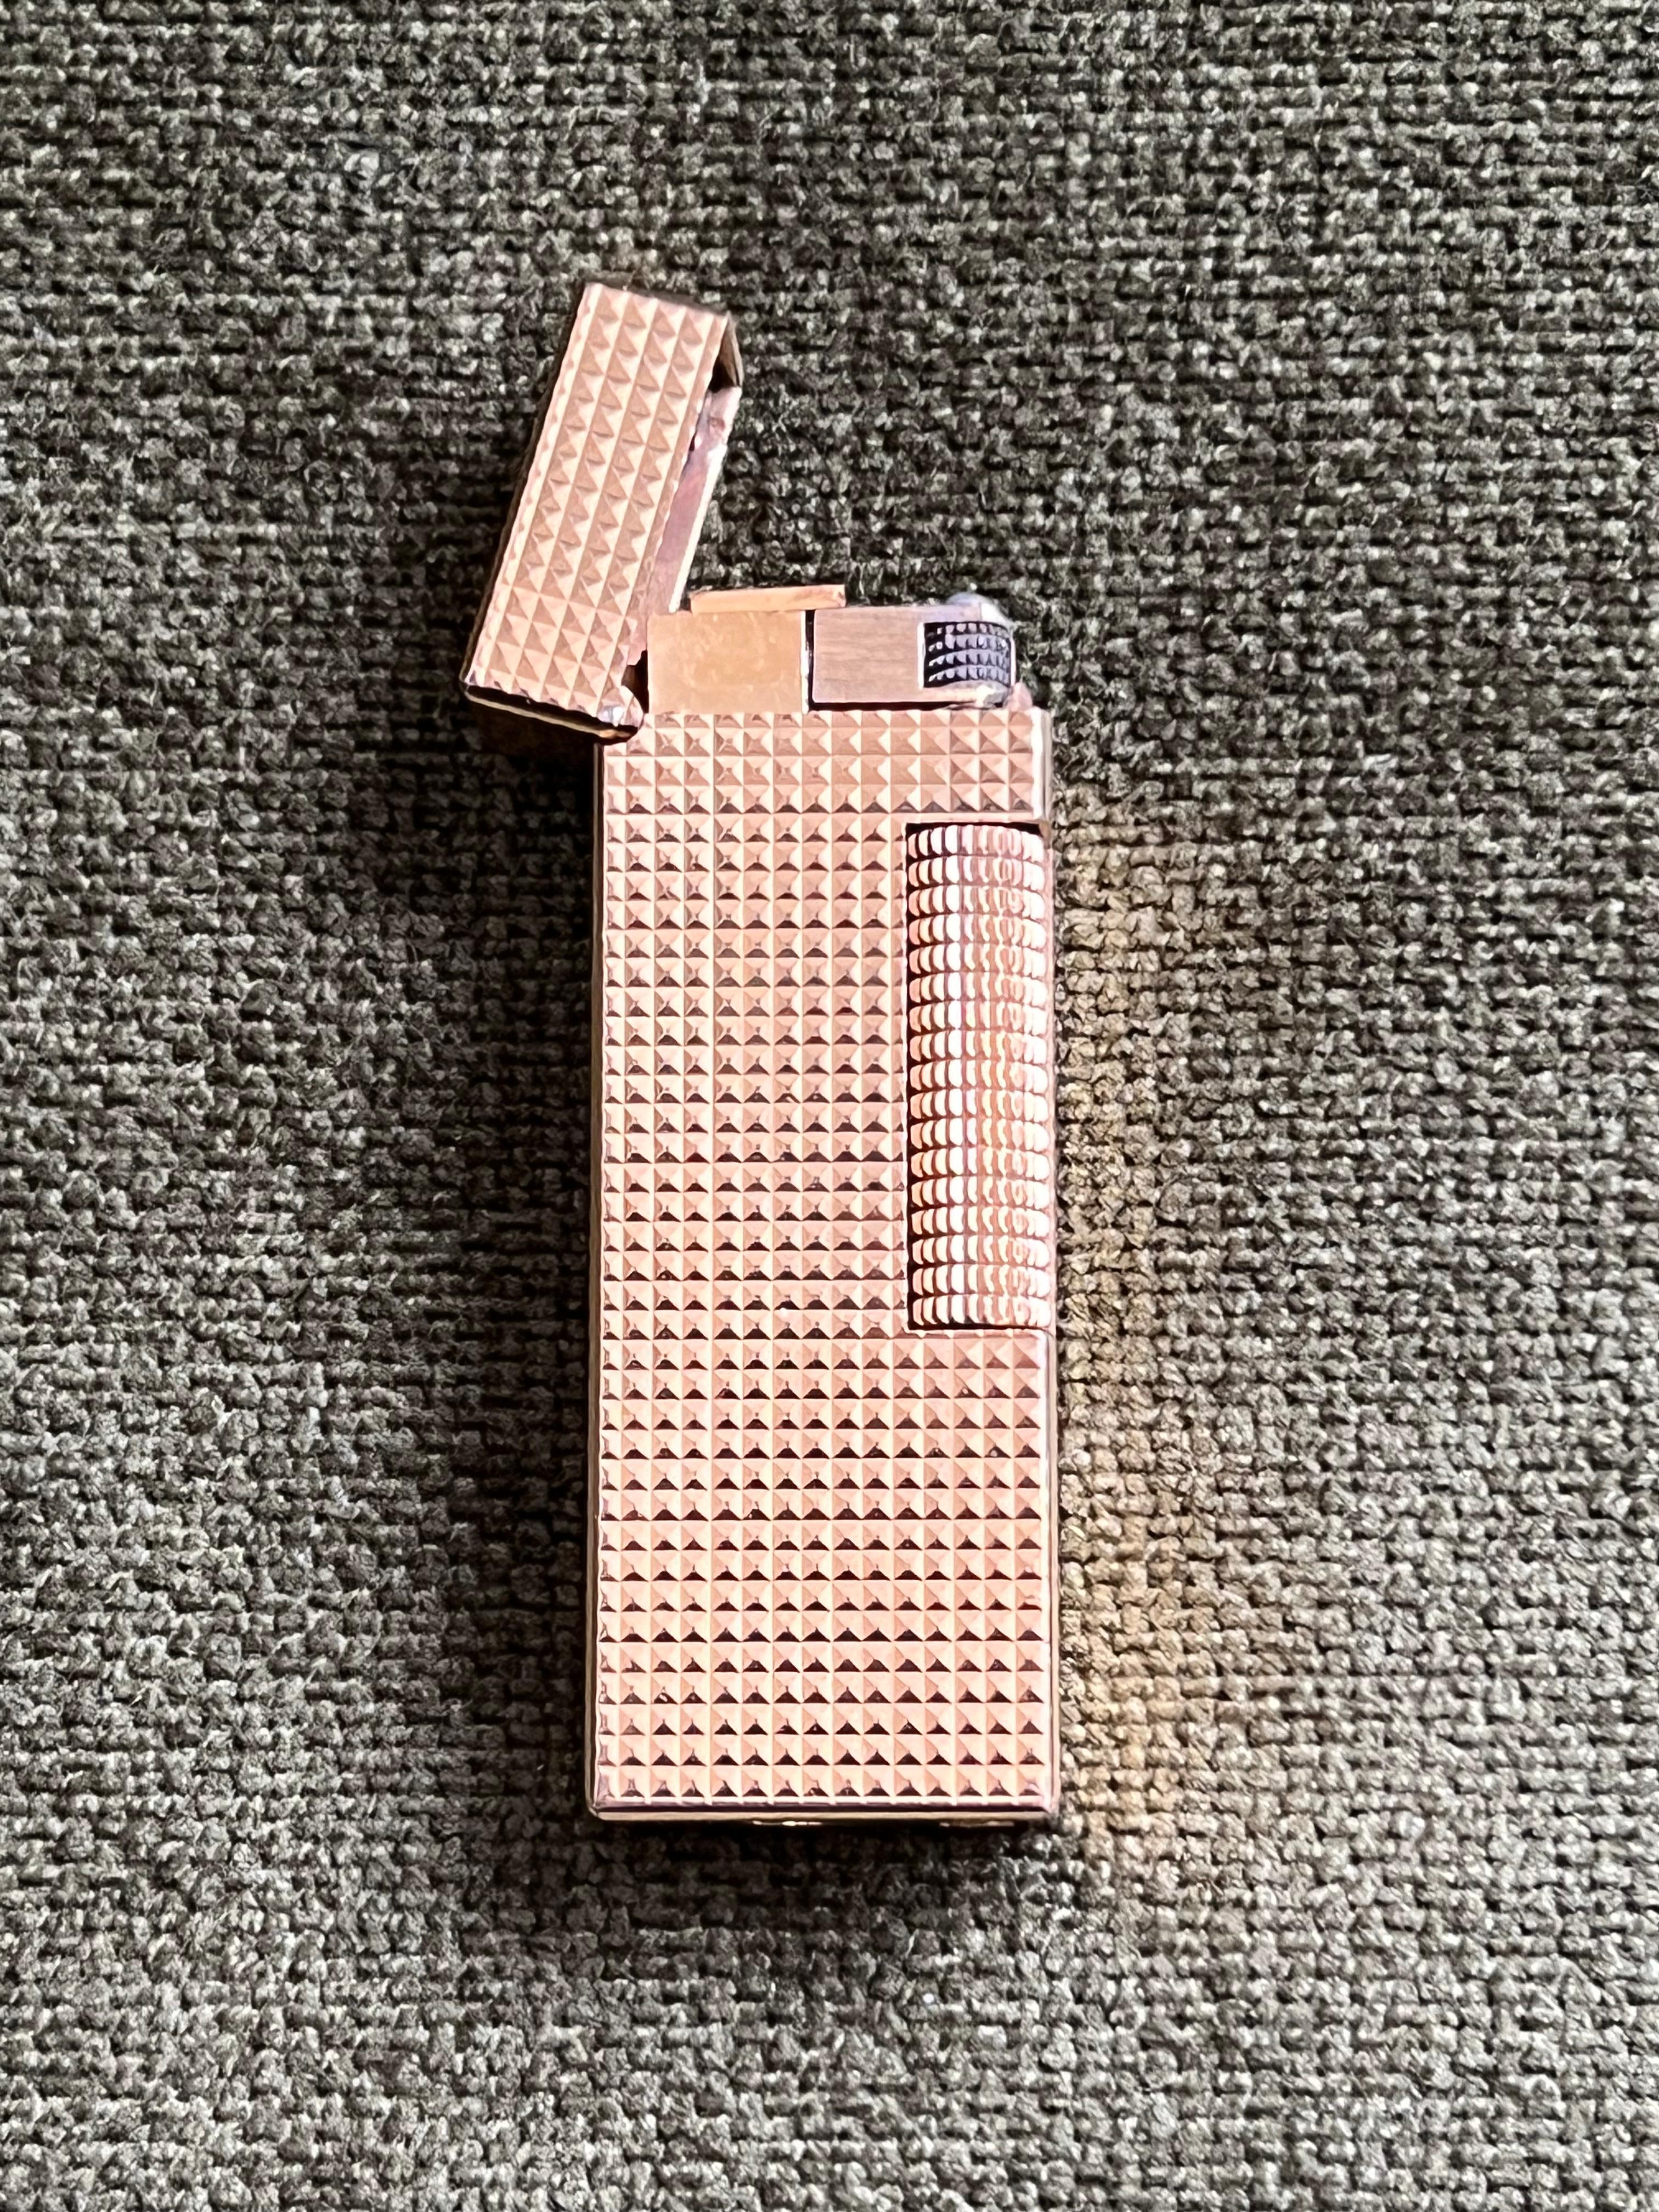 Dunhill “James Bond” Lighter of Choice, Diamond Pattern Gold Plated Lighter For Sale 2